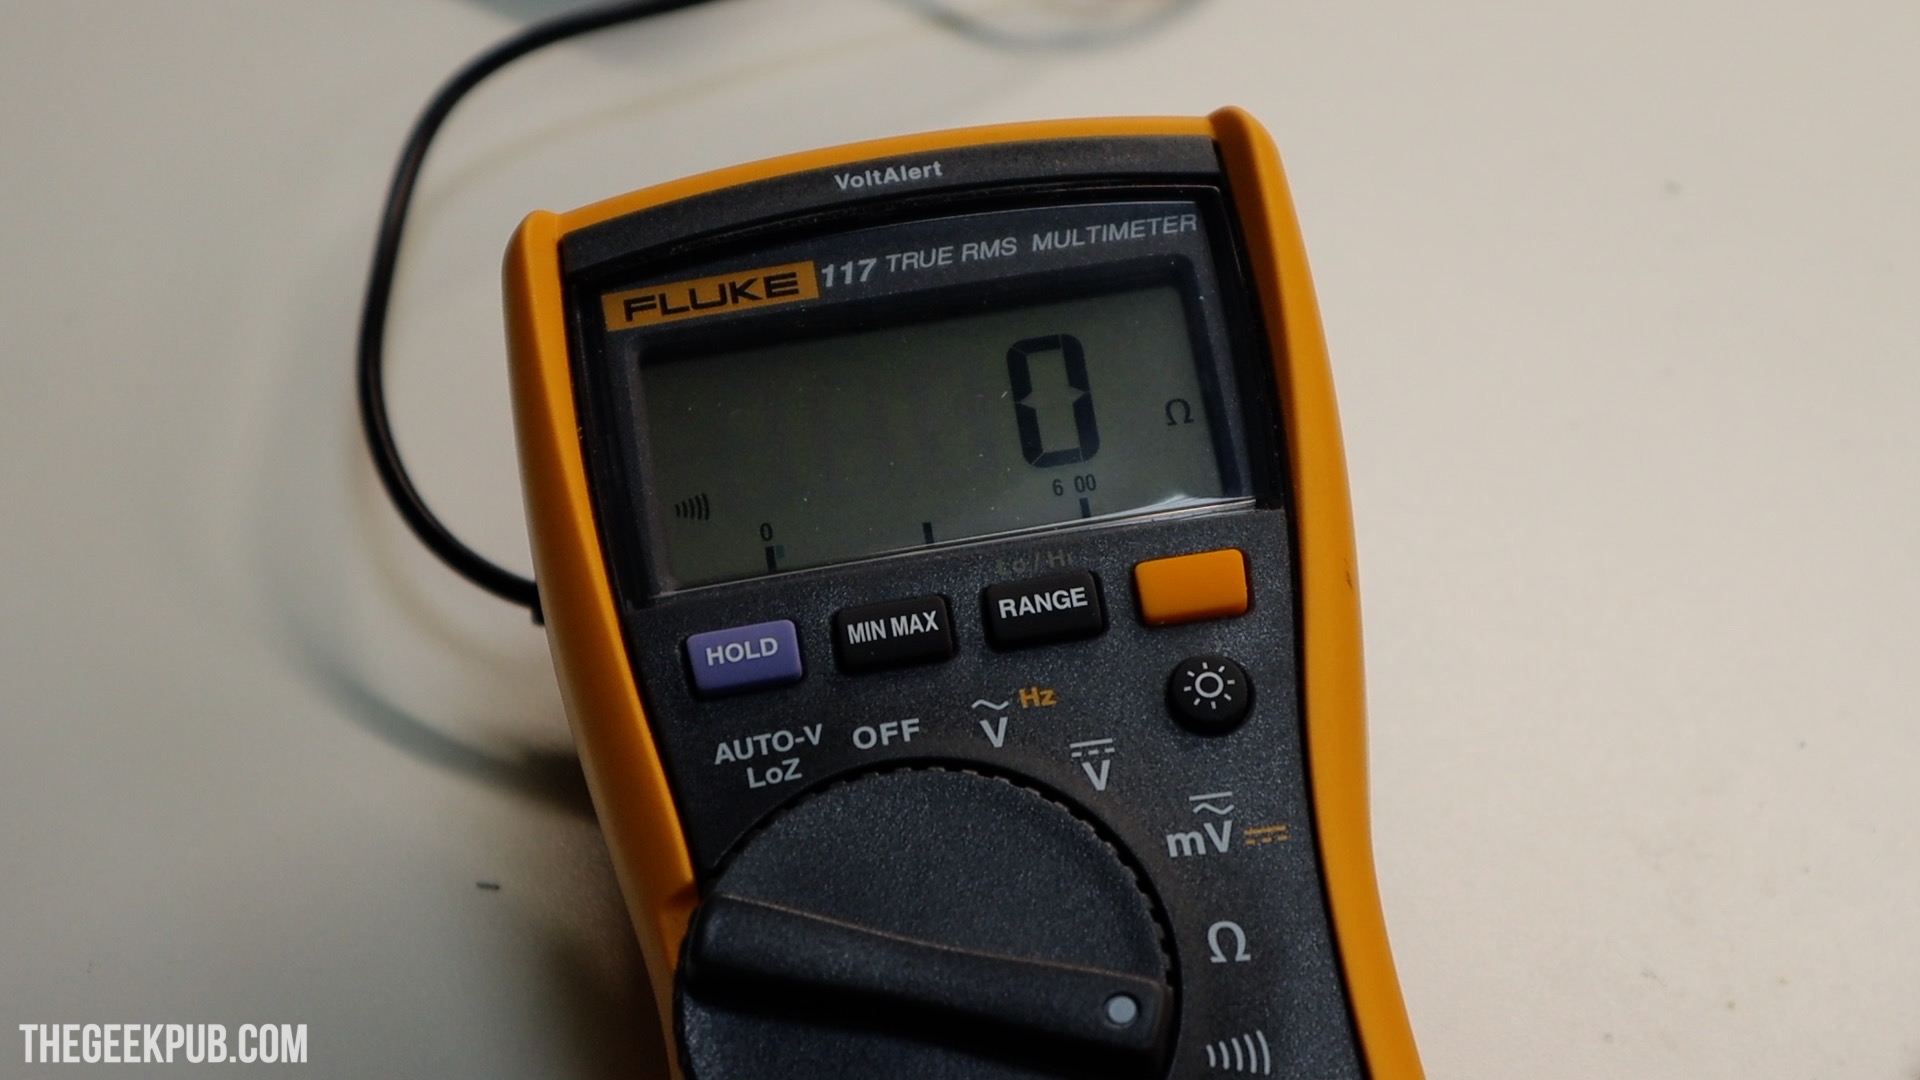 Testing with the multimeter